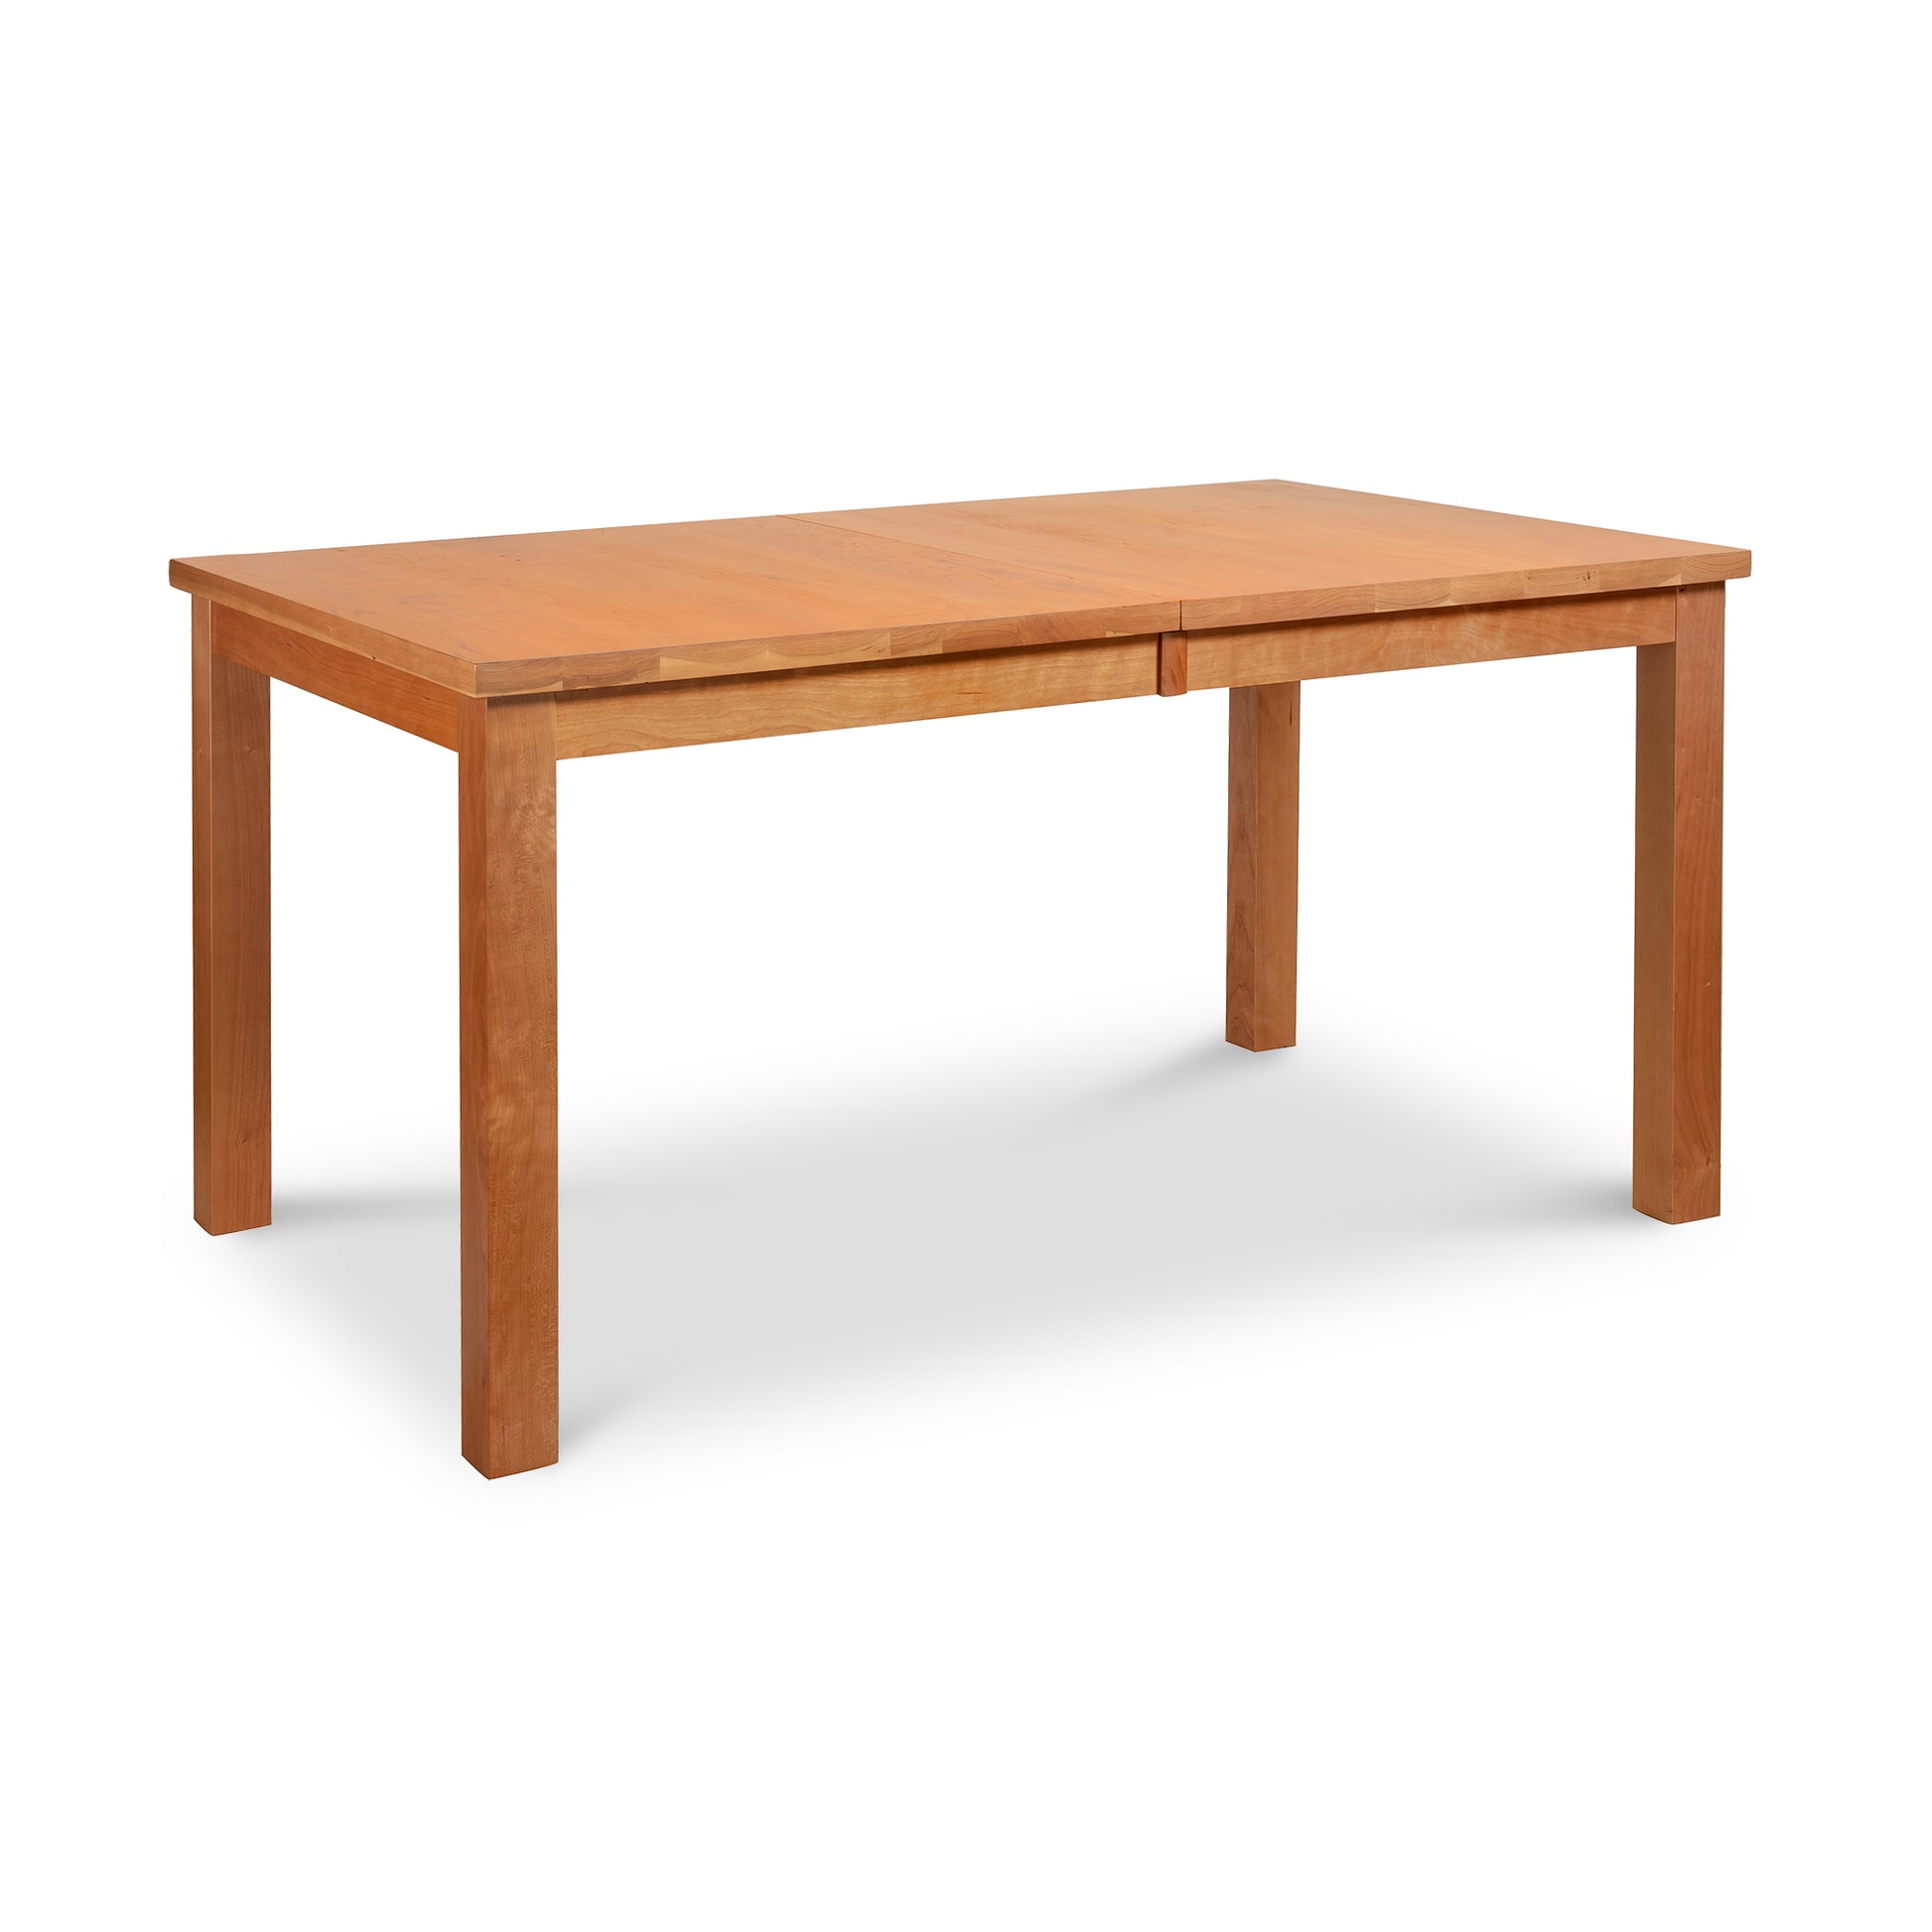 A Lyndon Furniture Modern Mission Parsons Extension Table - Floor Model made of eco-friendly Vermont wood, showcased on a white background.